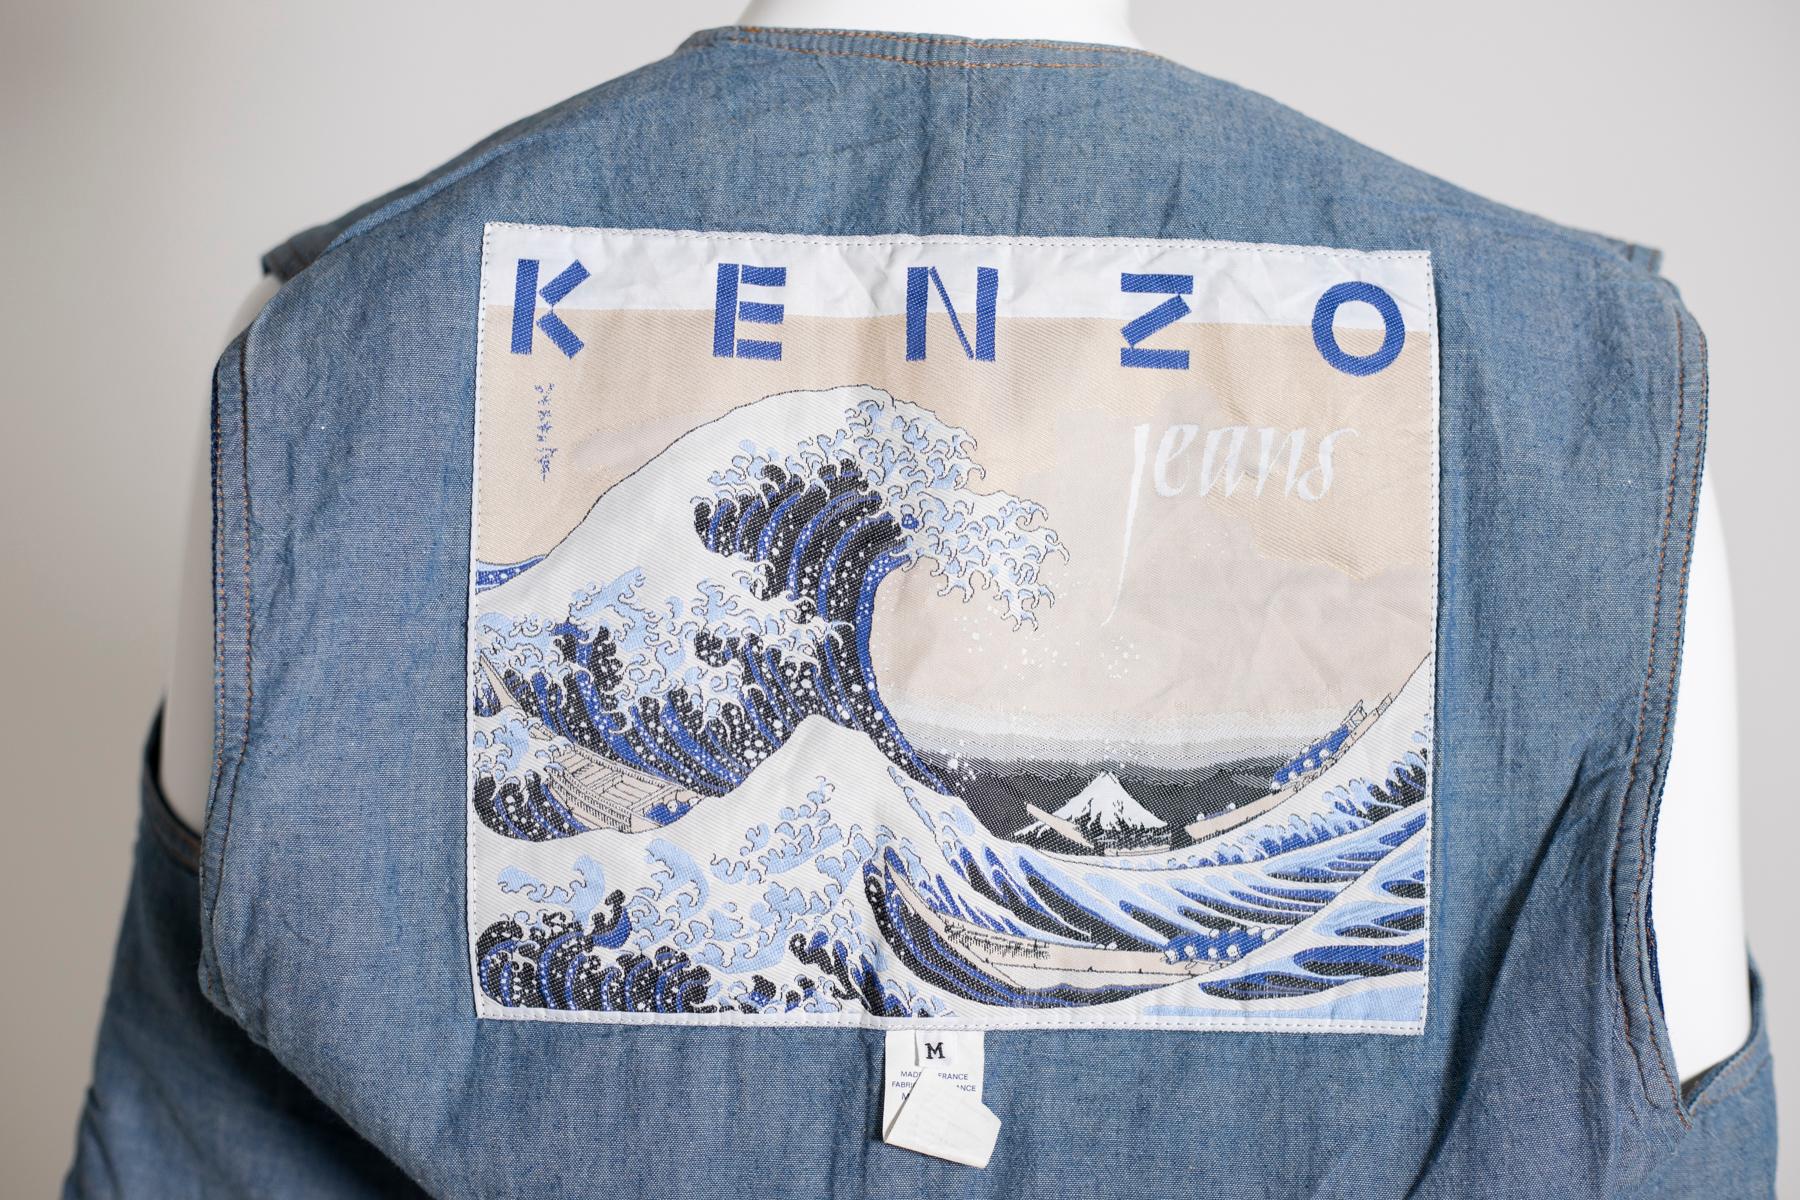 Kenzo limited edition waistcoat in jeans with Bohemian pattern embroidered on the front, from 1990s. The vest is part of the collection dedicated to the famous Japanese artist Hokusai, in fact, inside the vest we can admire his most famous work: The